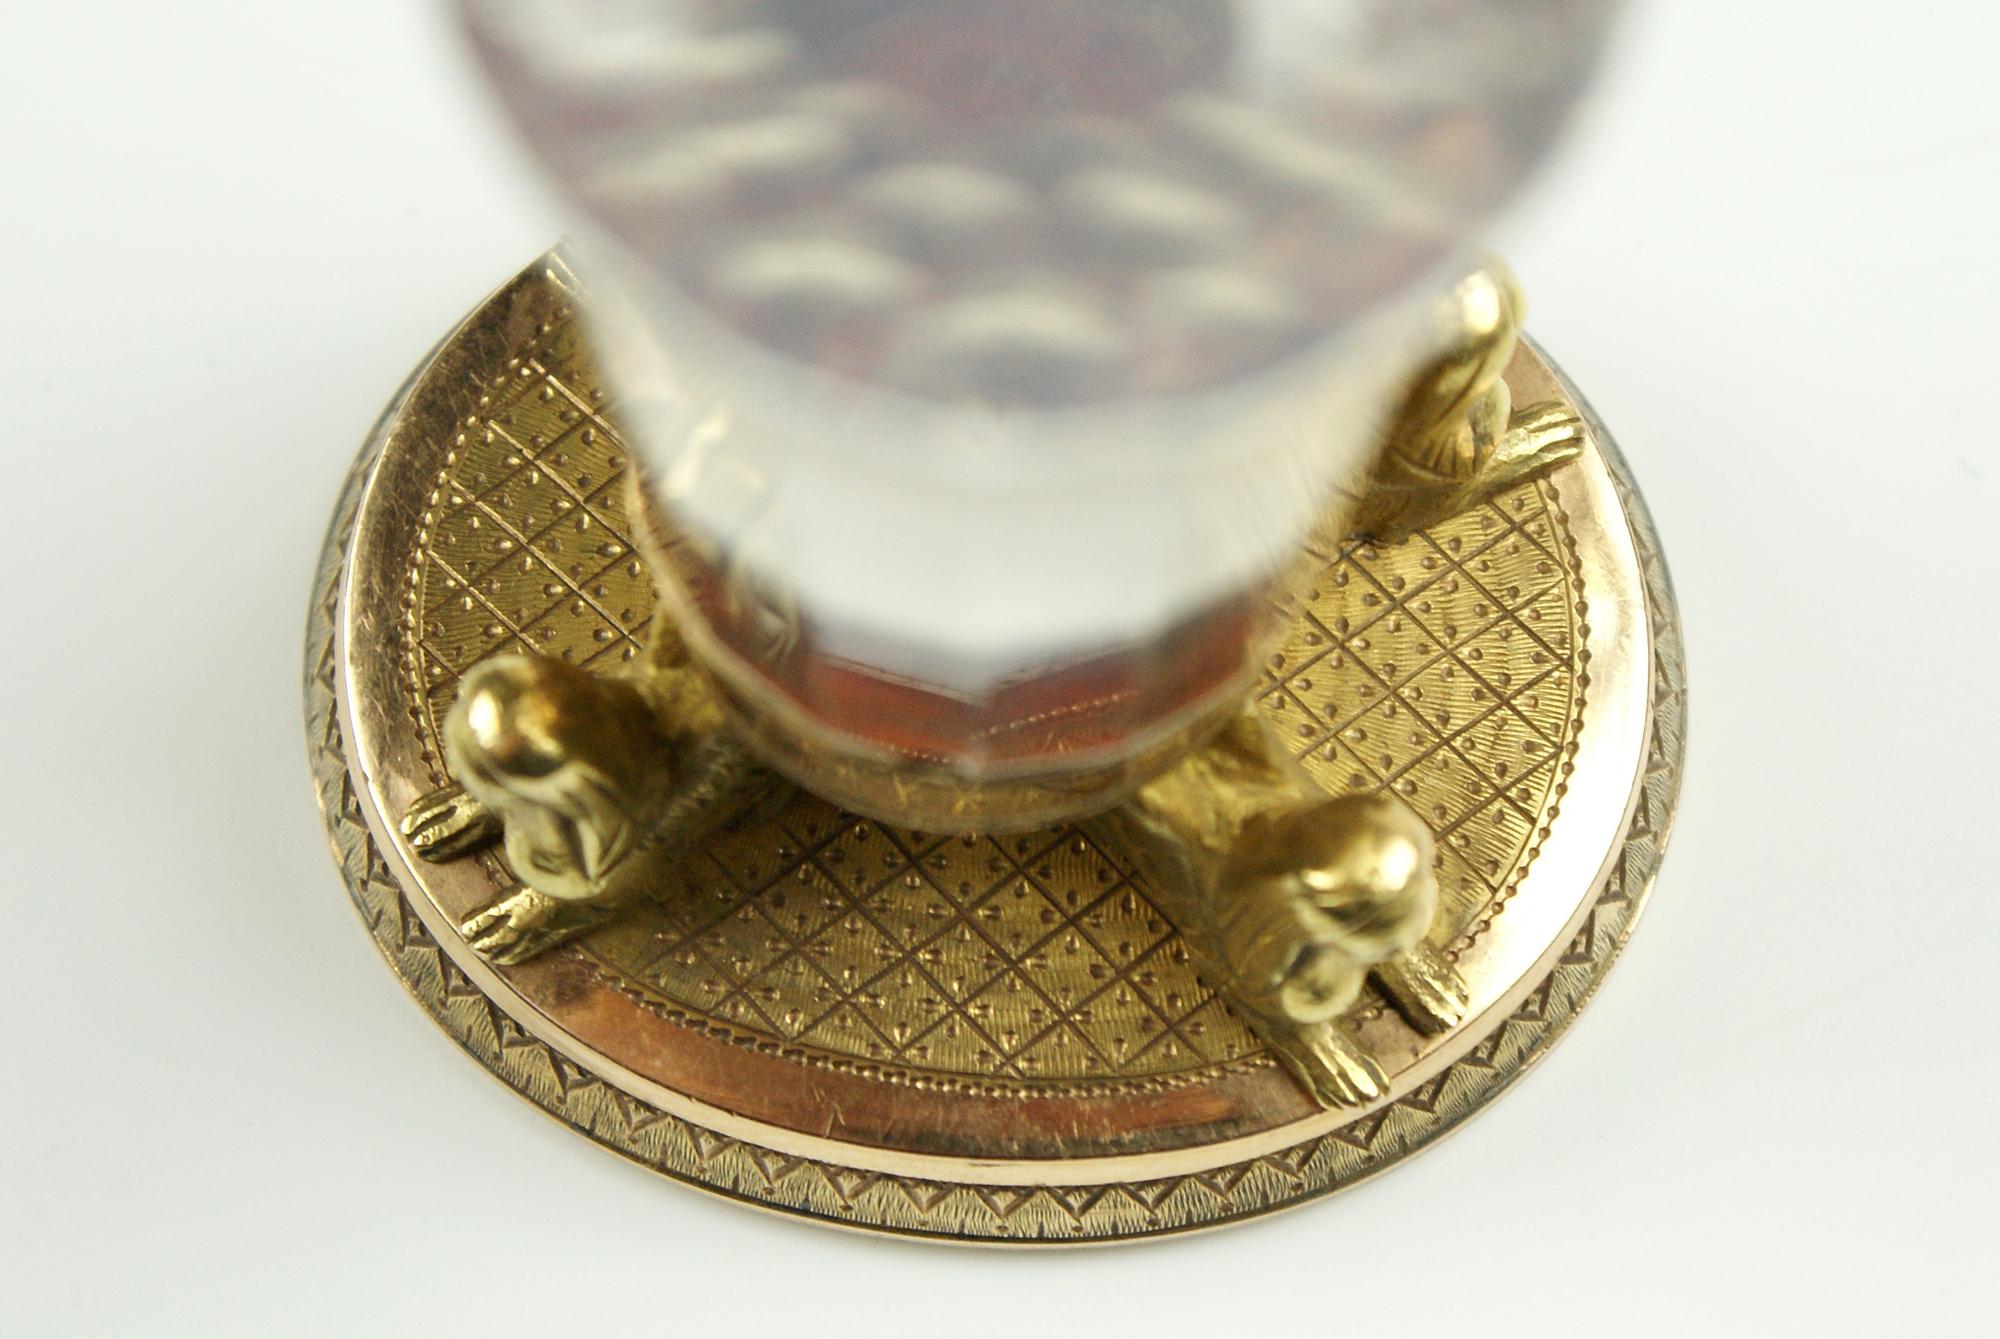 Magnificent 2 colour gold Egyptian Revival Seal matrix engraved with coat of arms of Count - Image 7 of 7